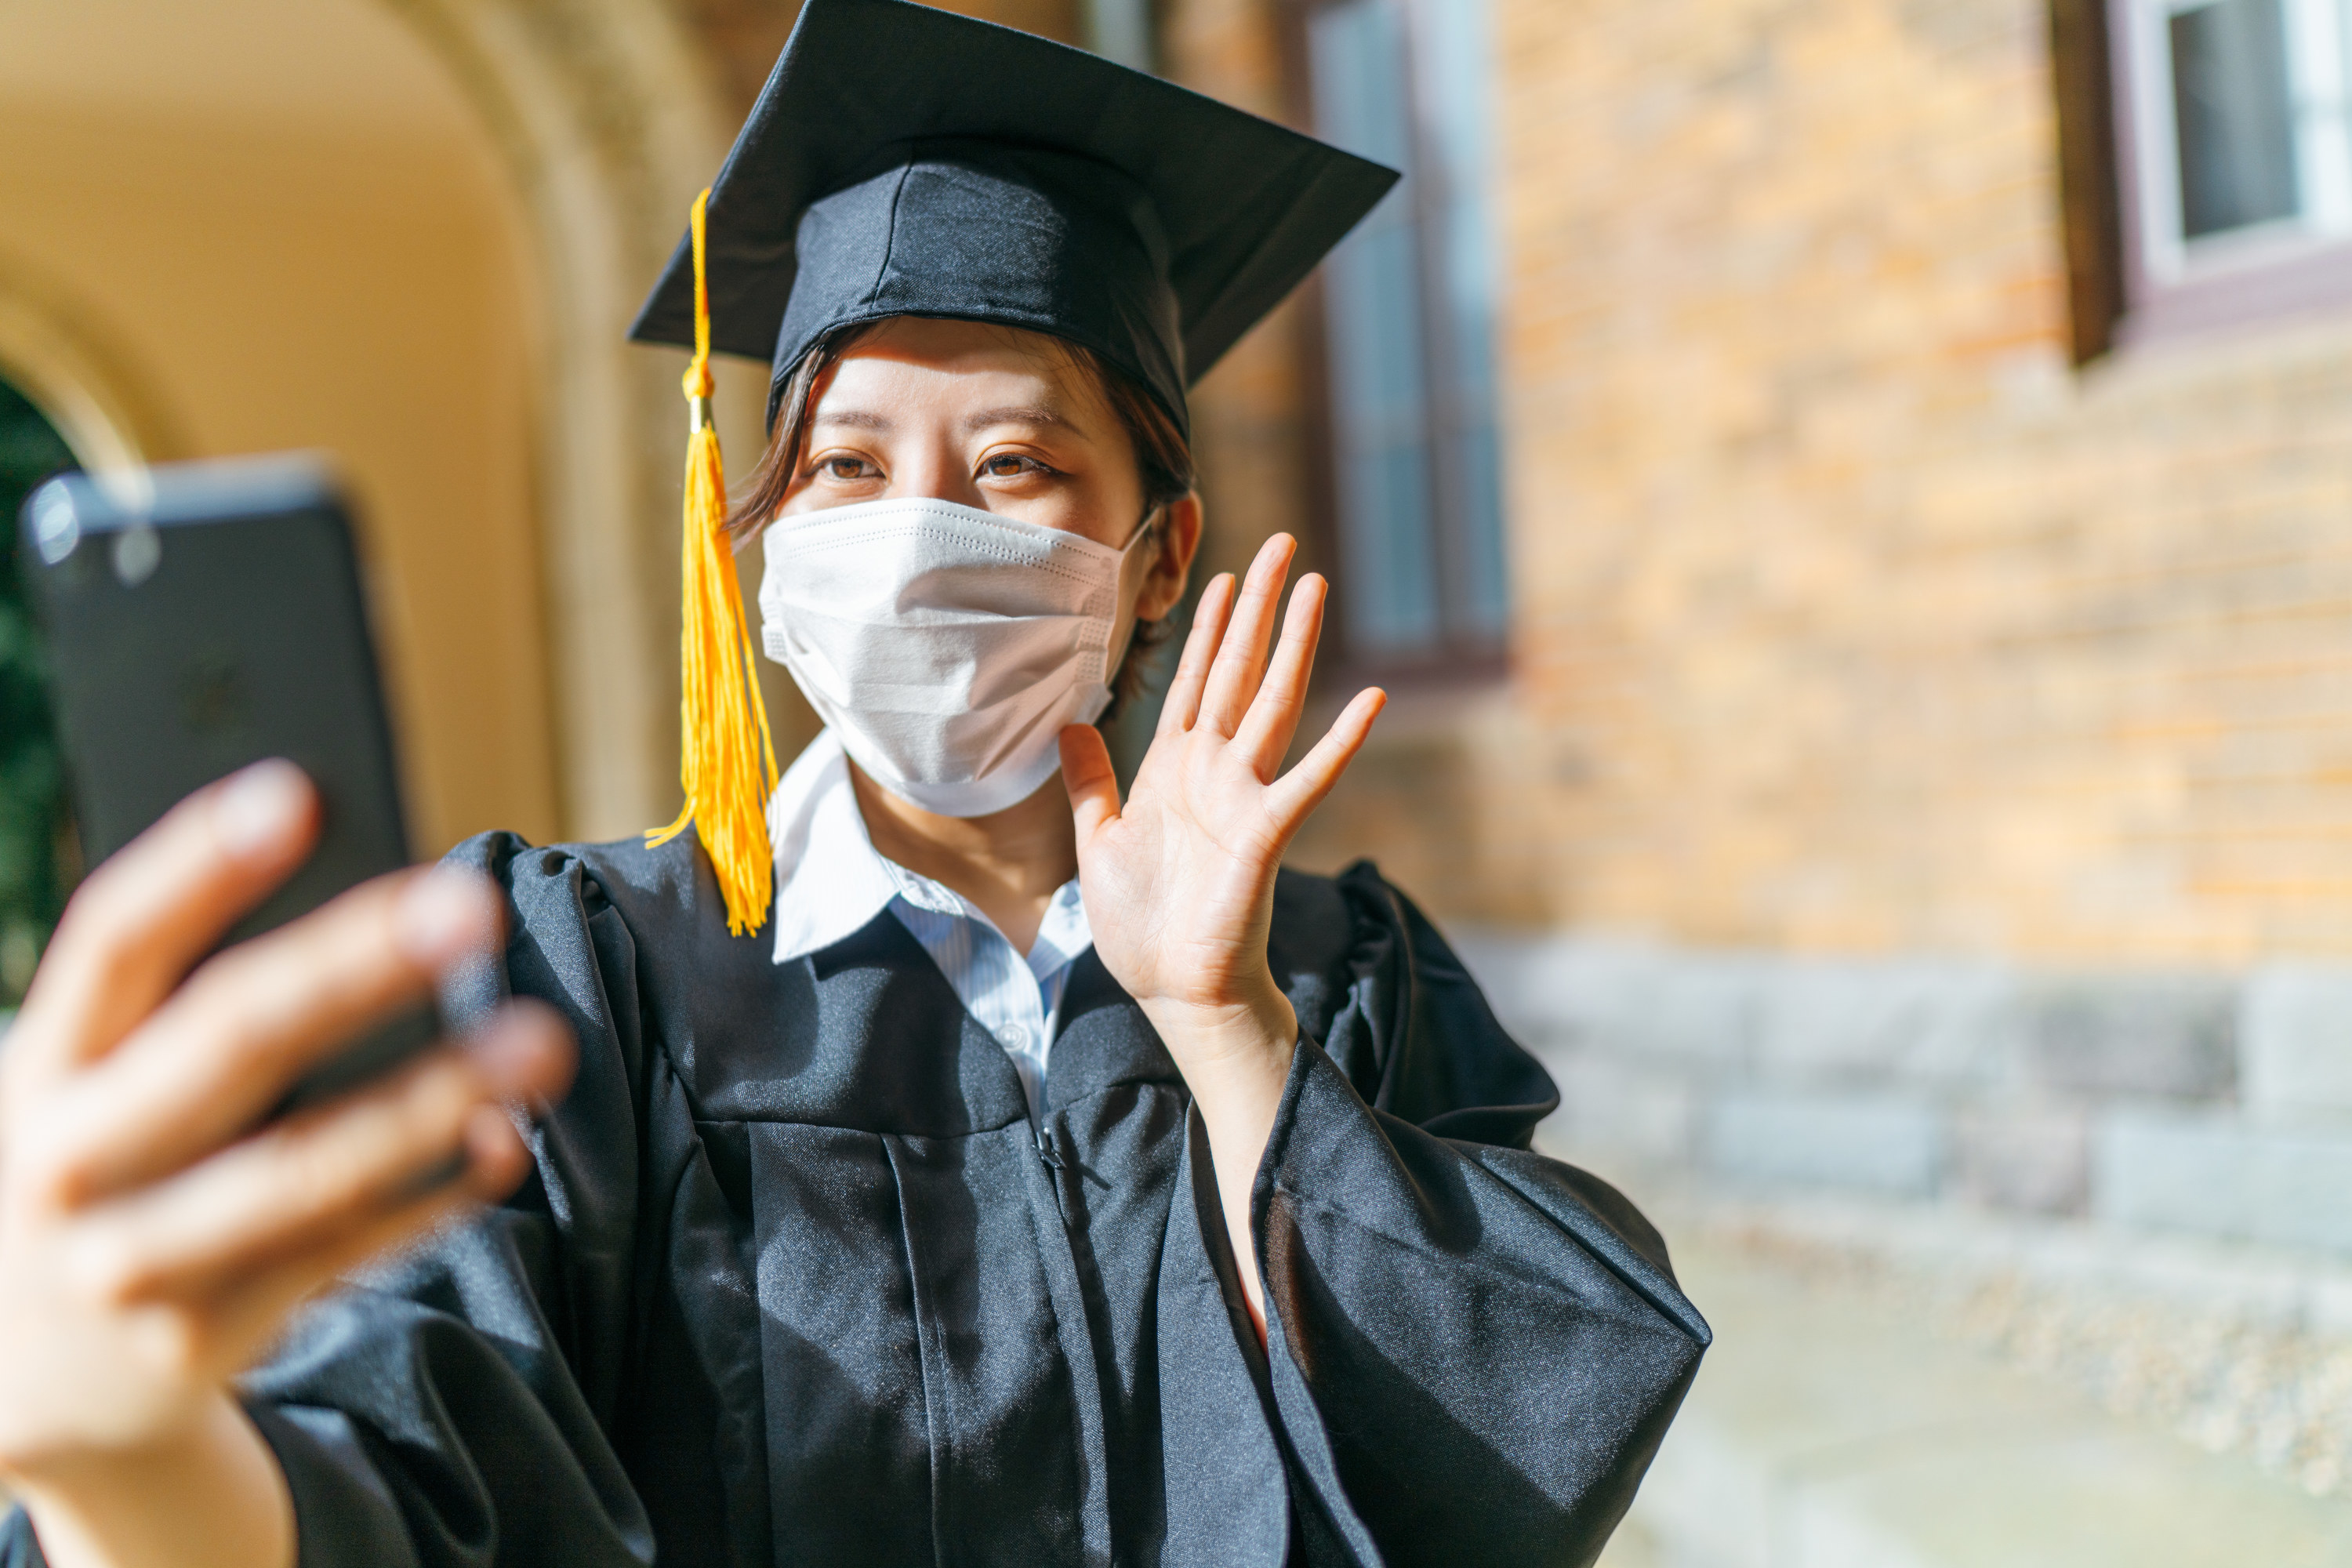 Student taking a selfie in their graduation cap and gown